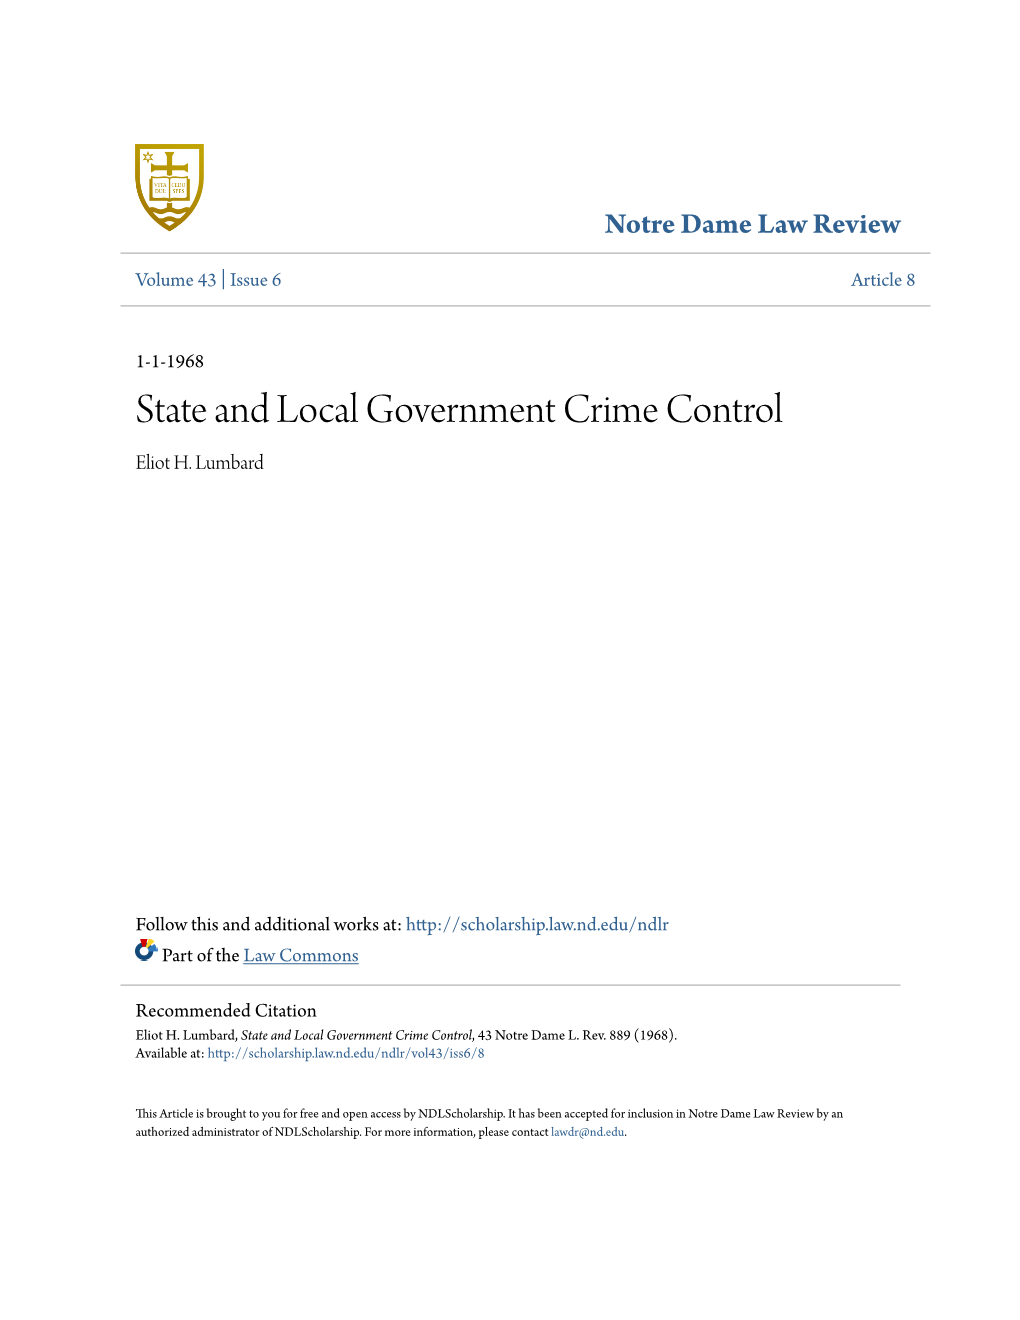 State and Local Government Crime Control Eliot H